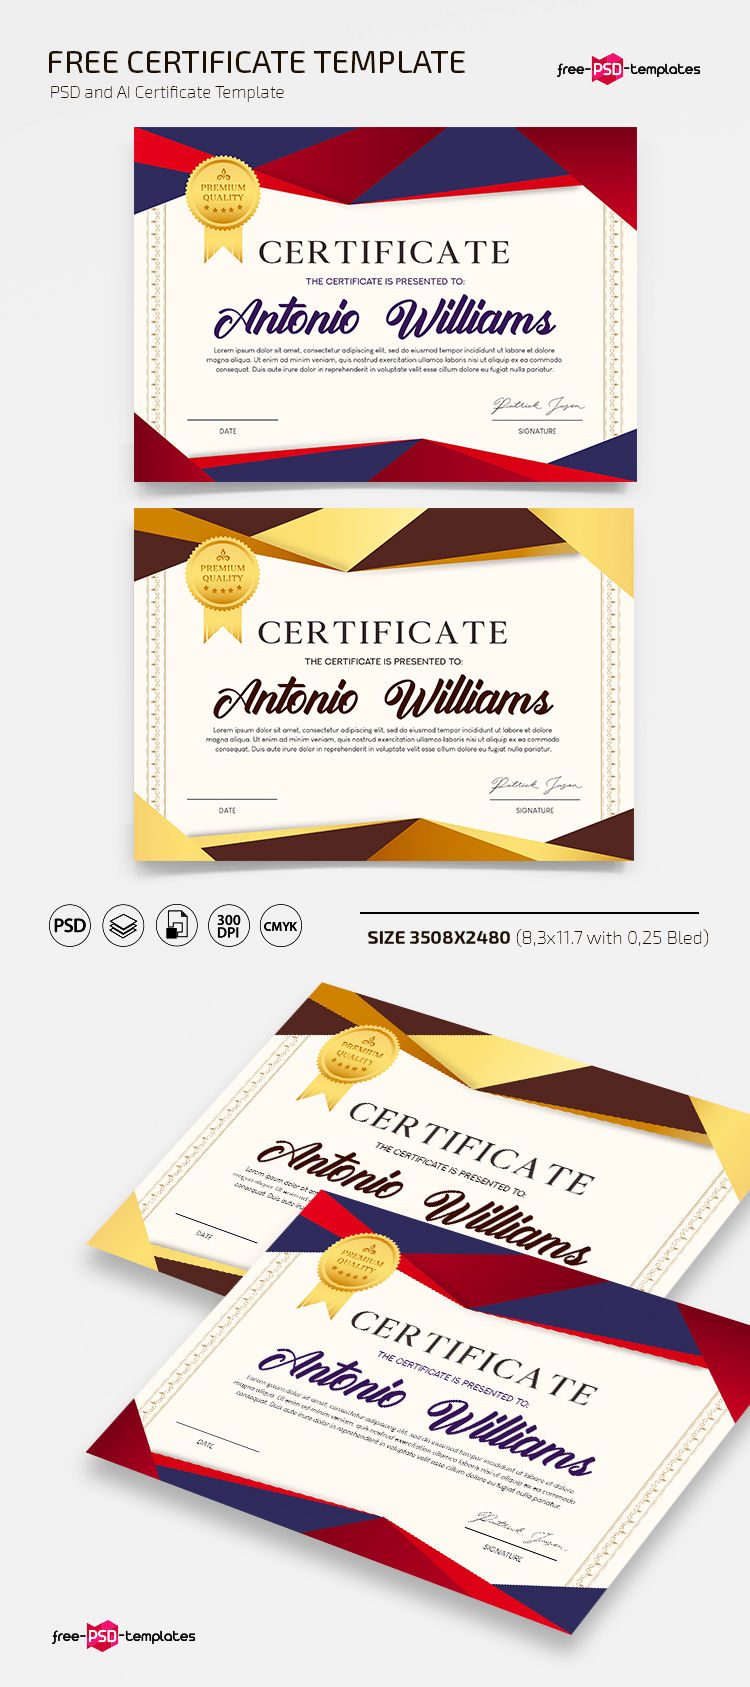 Free Certificate Template In Psd Free Psd Templates